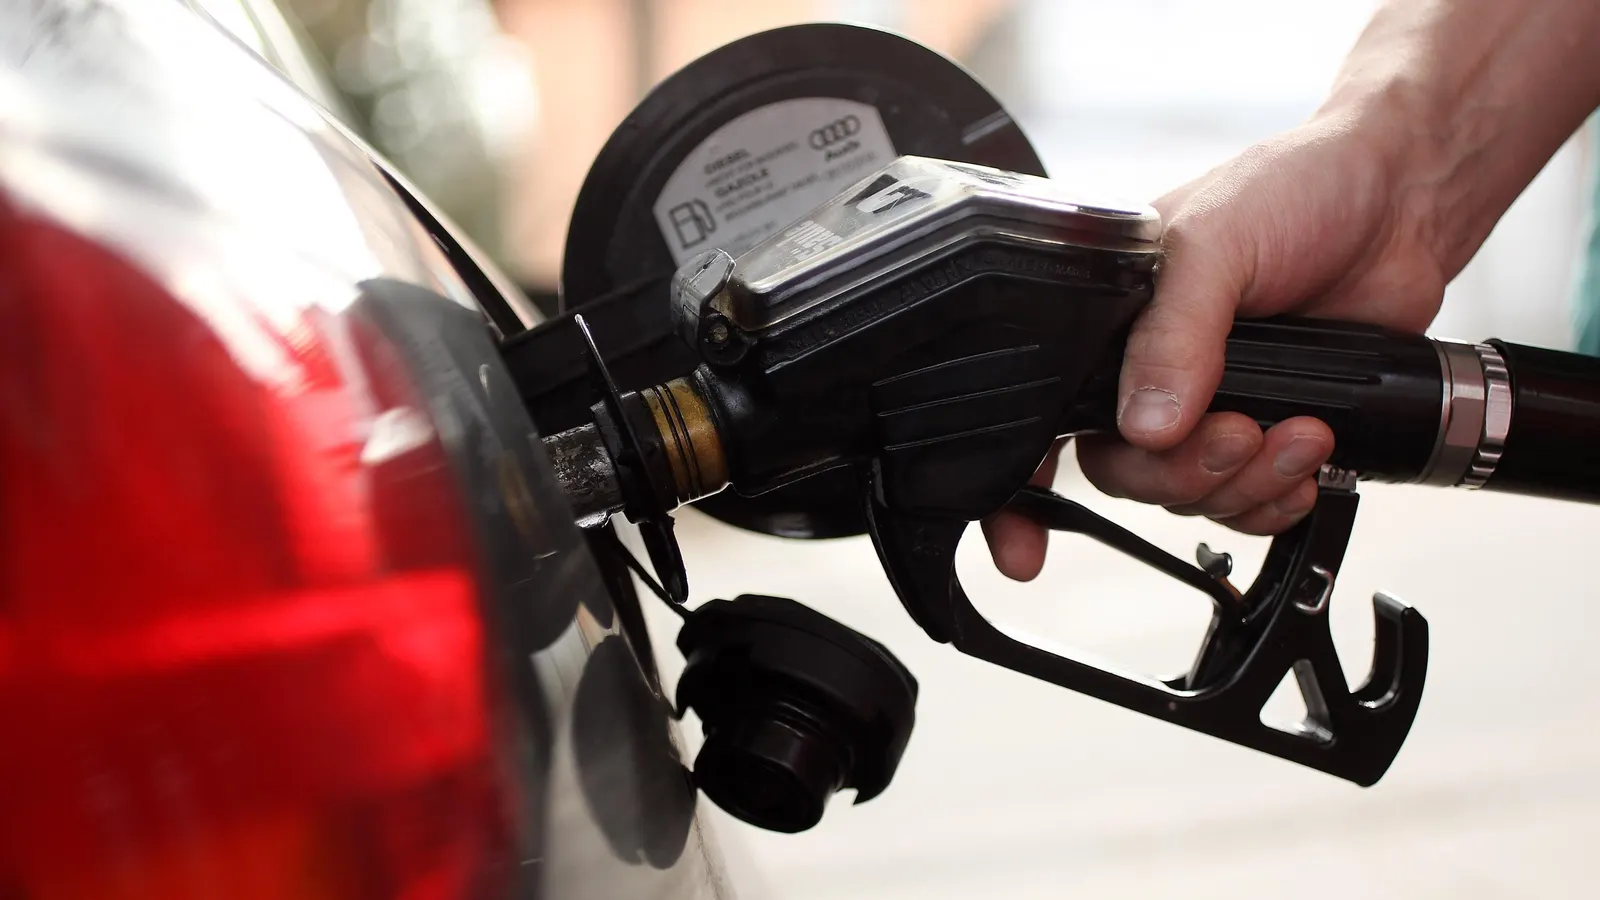 How Will Gas Prices Affect Your Road Trips? Analysts Predict Changes Ahead